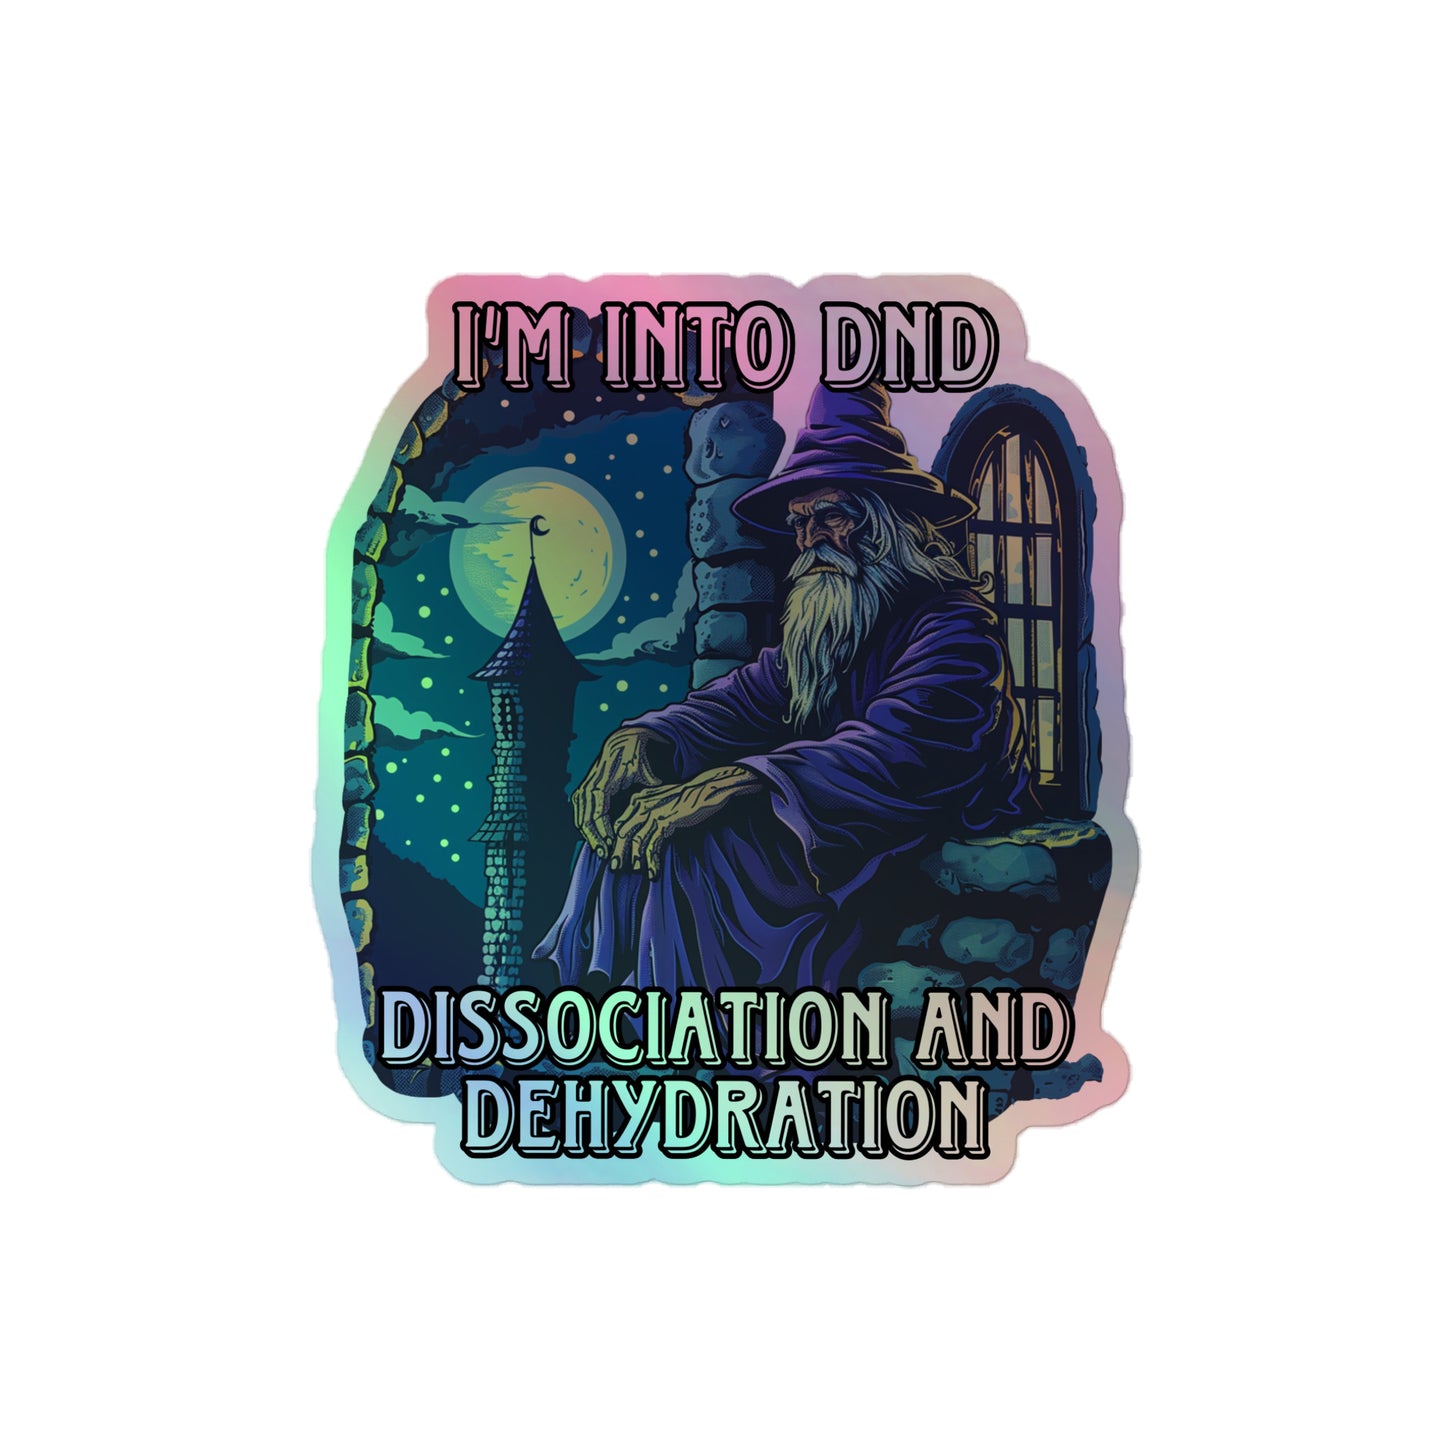 I’m into dnd dissociation and dehydration Holograpic sticker